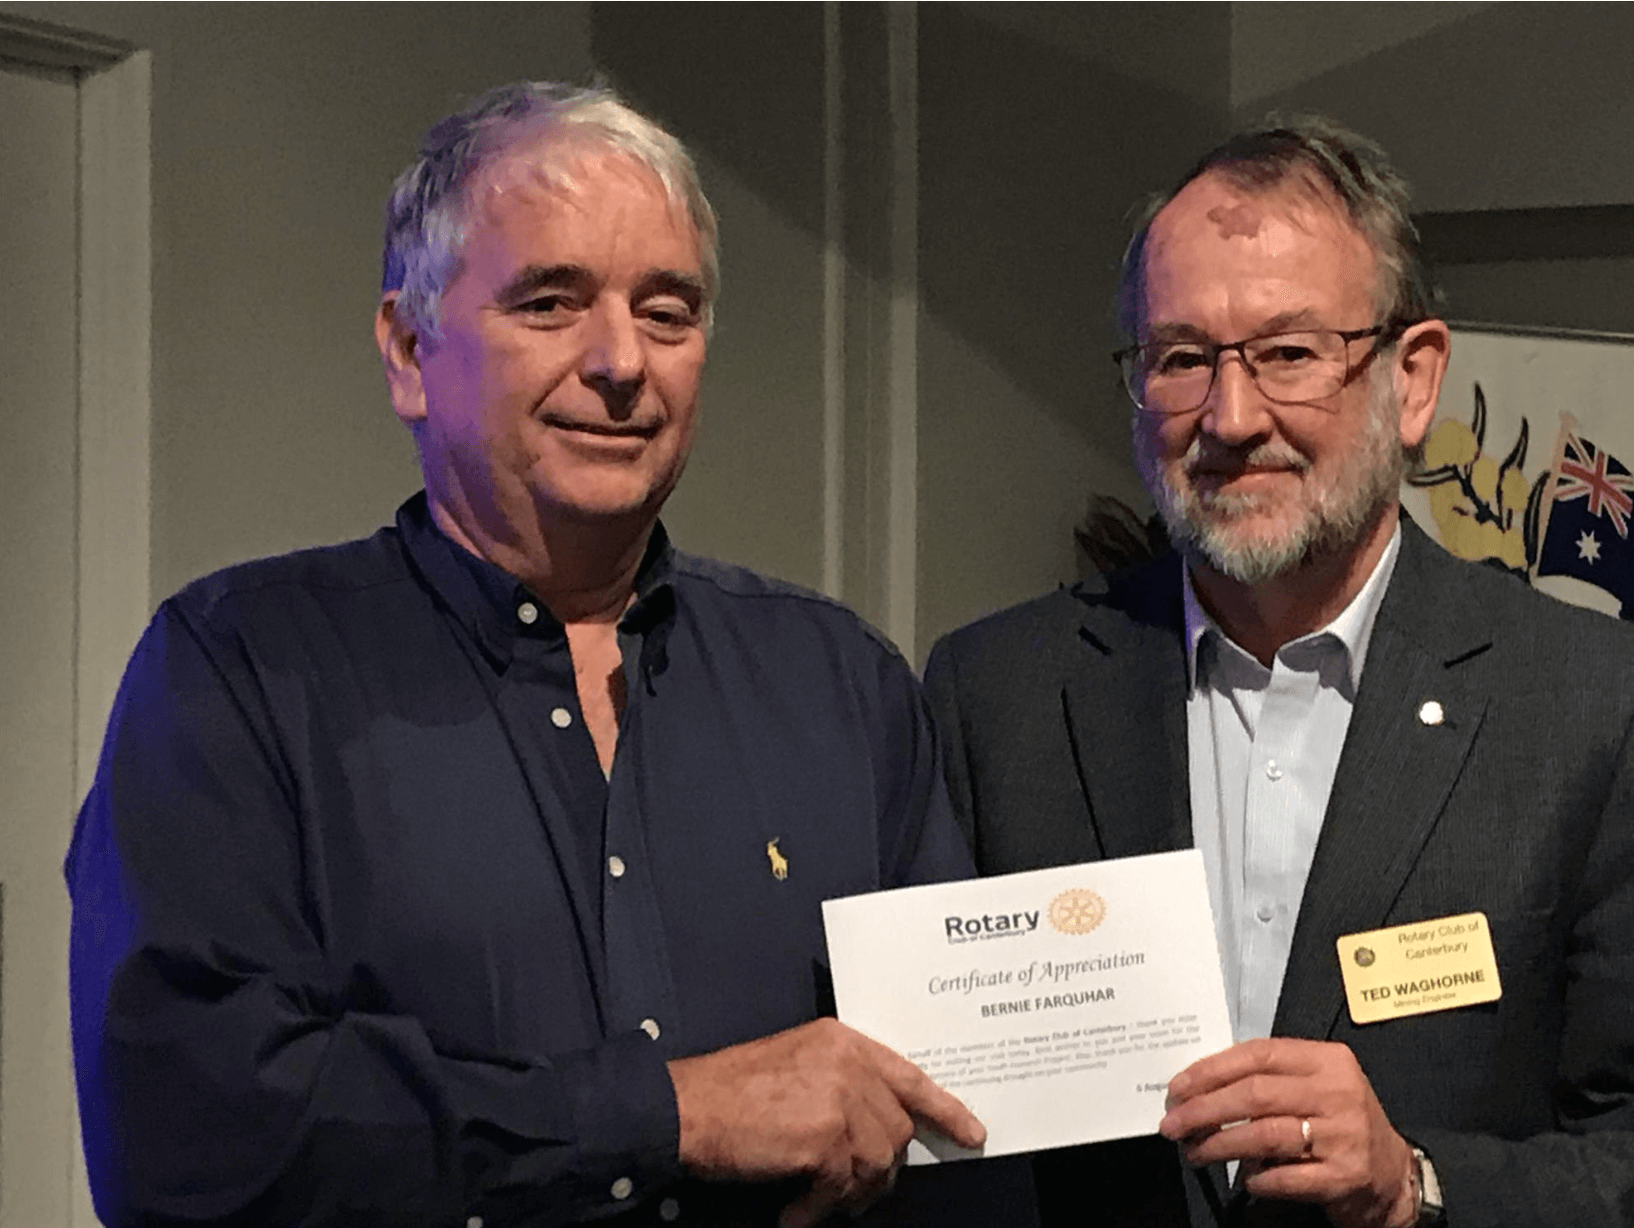 Two men holding Rotary's certificate of appreciation.